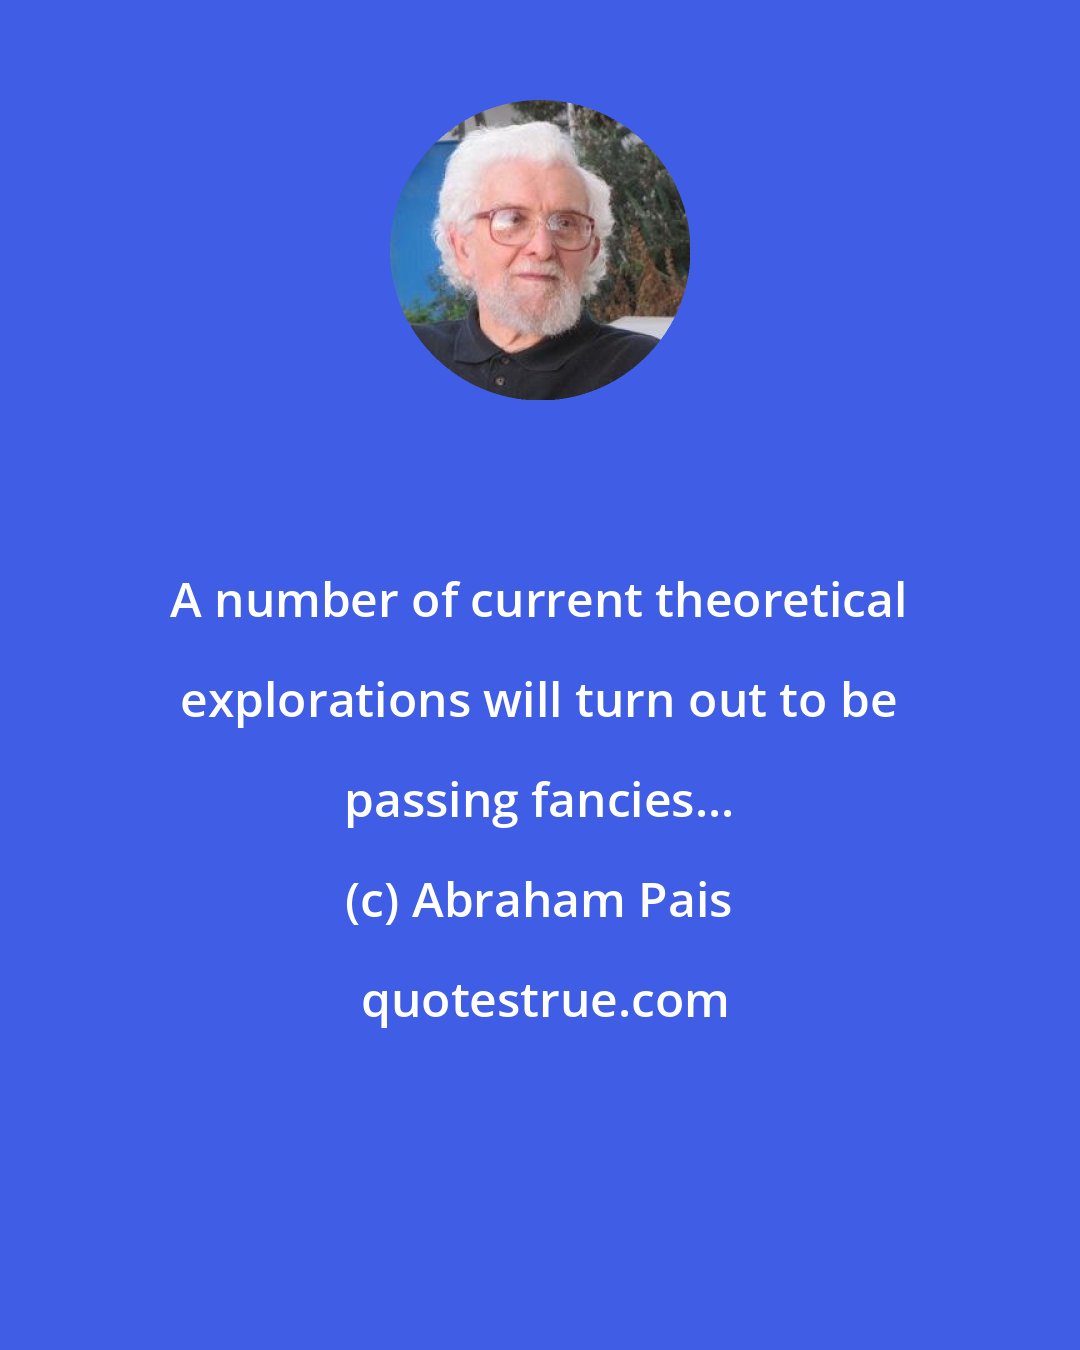 Abraham Pais: A number of current theoretical explorations will turn out to be passing fancies...